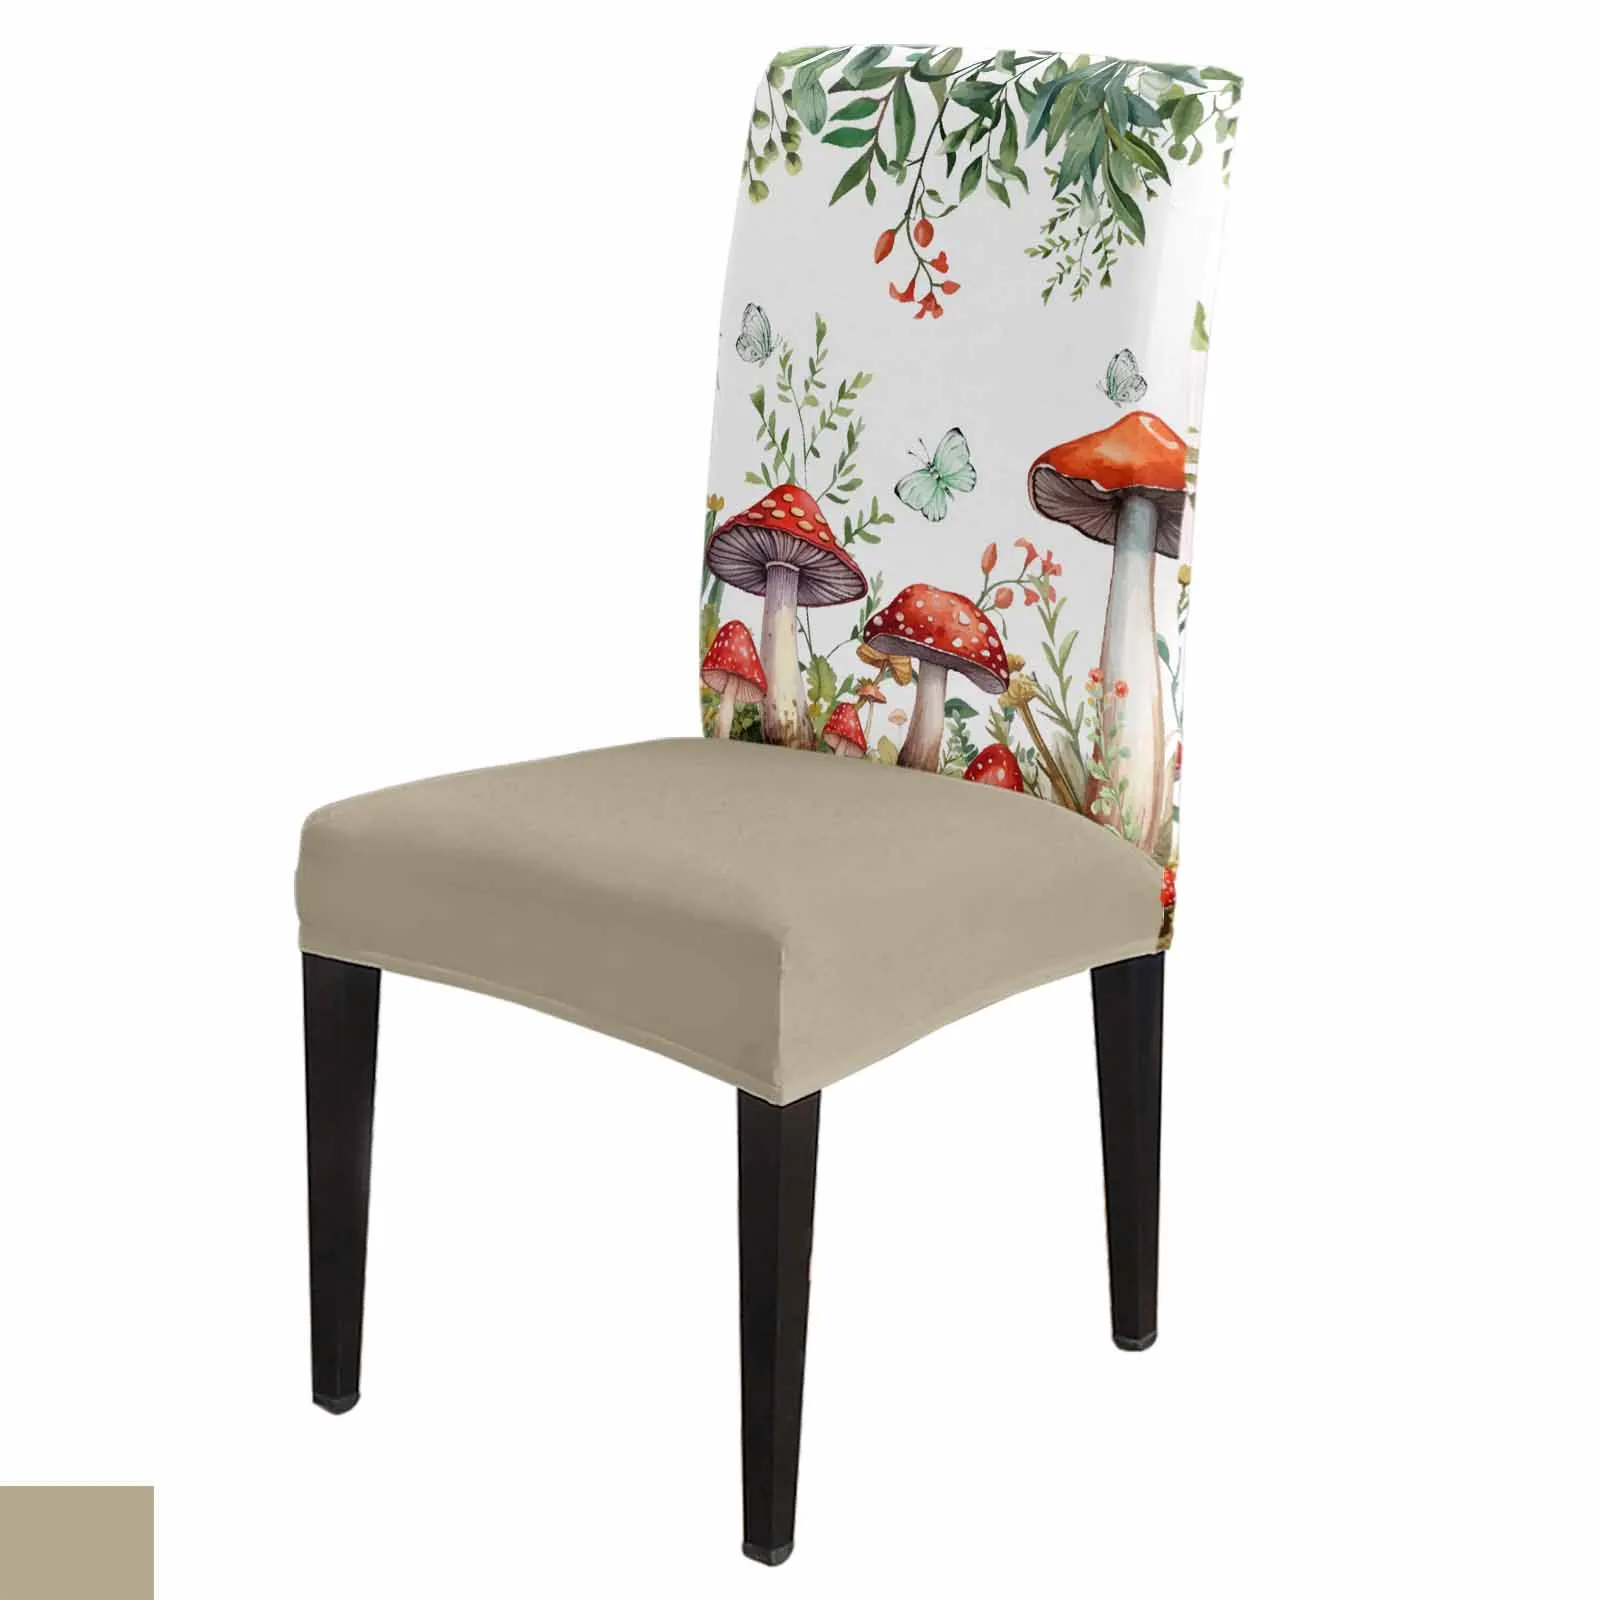 

Plant Mushroom Butterfly Watercolor Chair Cover Set Kitchen Stretch Spandex Seat Slipcover Home Decor Dining Room Seat Cover